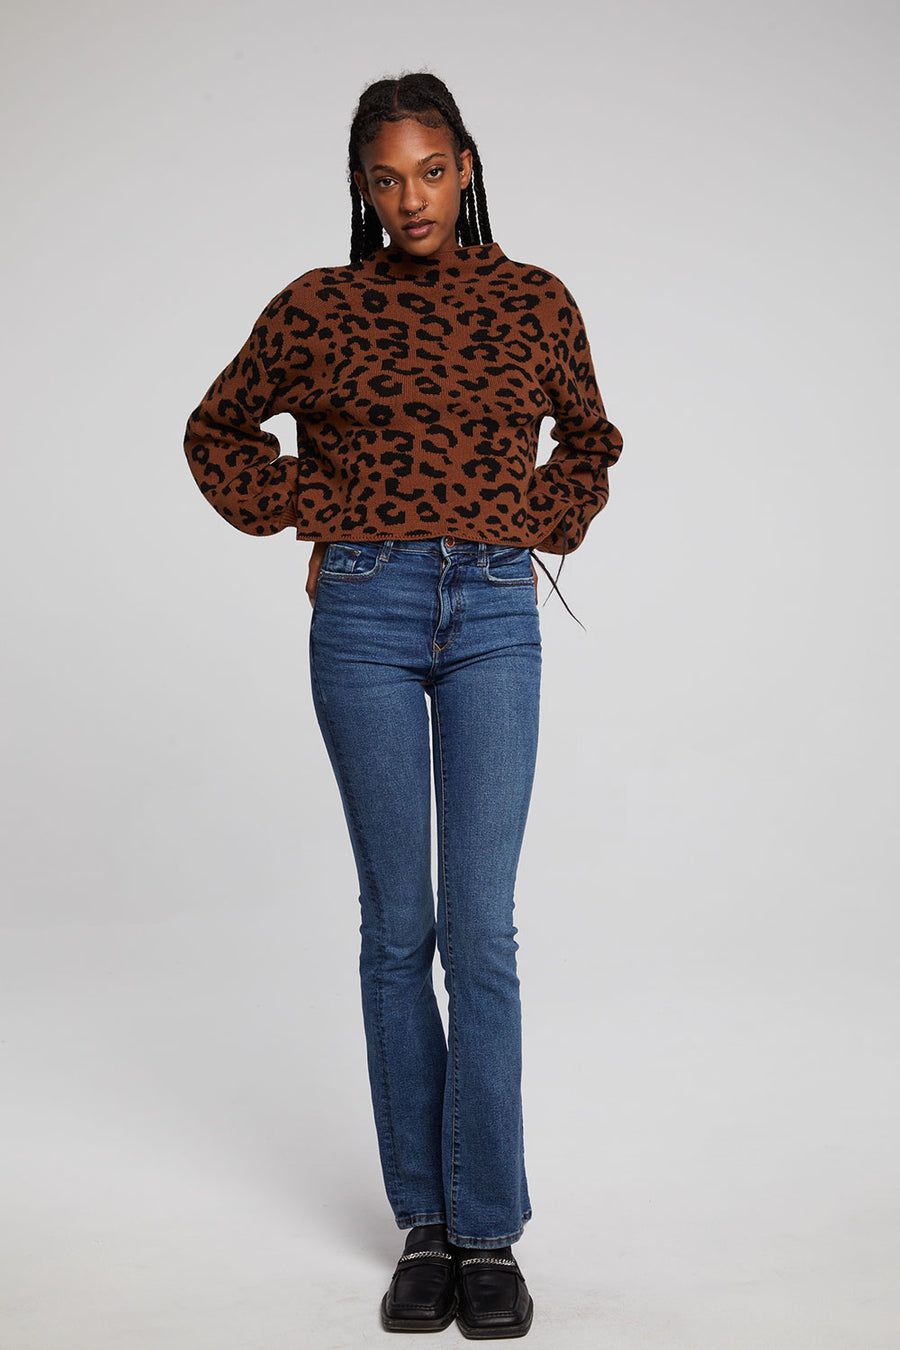 Willie Old Town Leopard Pullover WOMENS chaserbrand